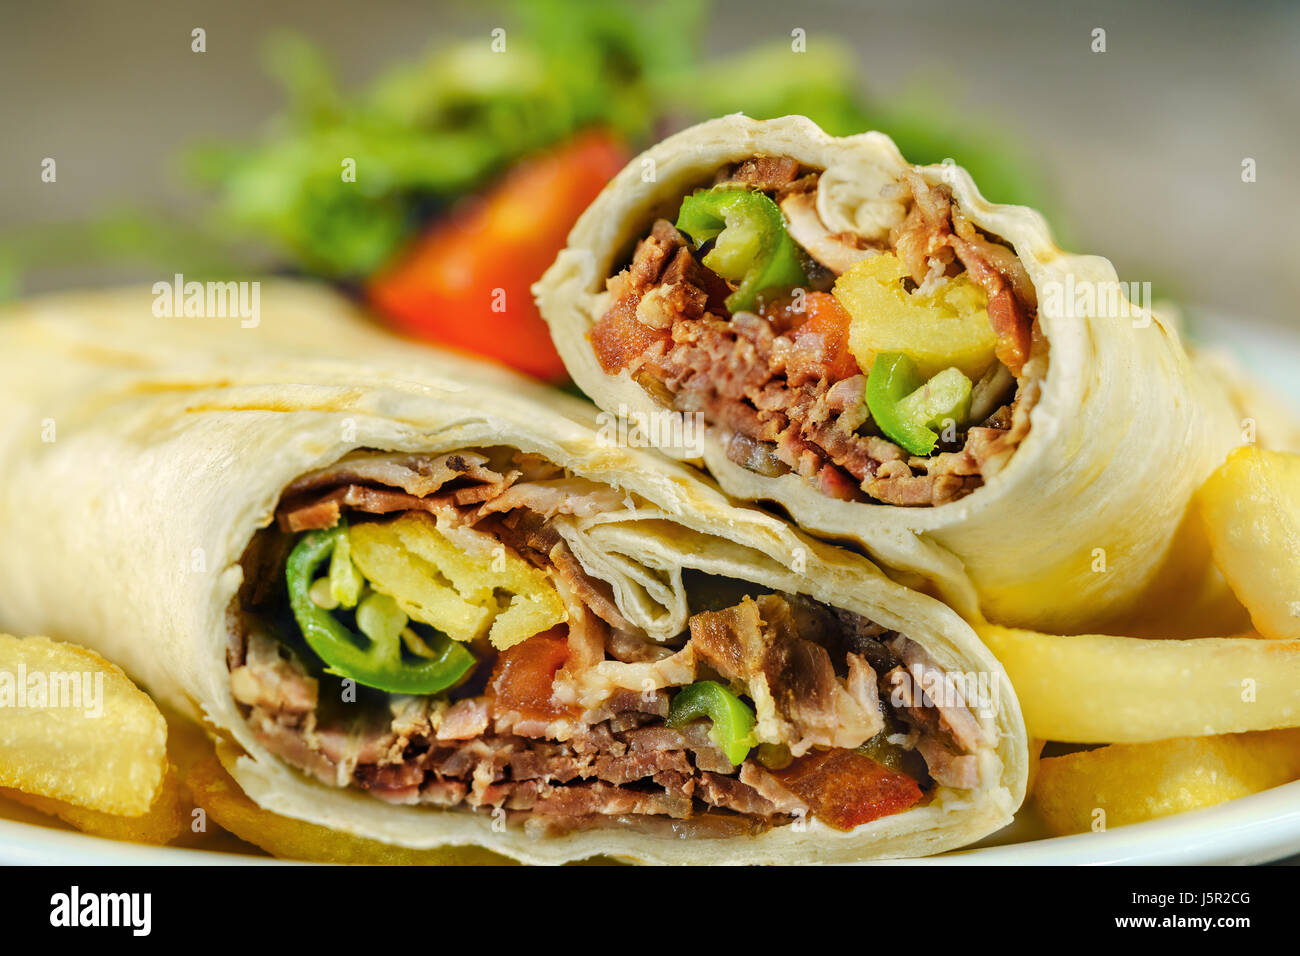 Traditional turkish fast food. Döner Kebap is wrapping. Stock Photo